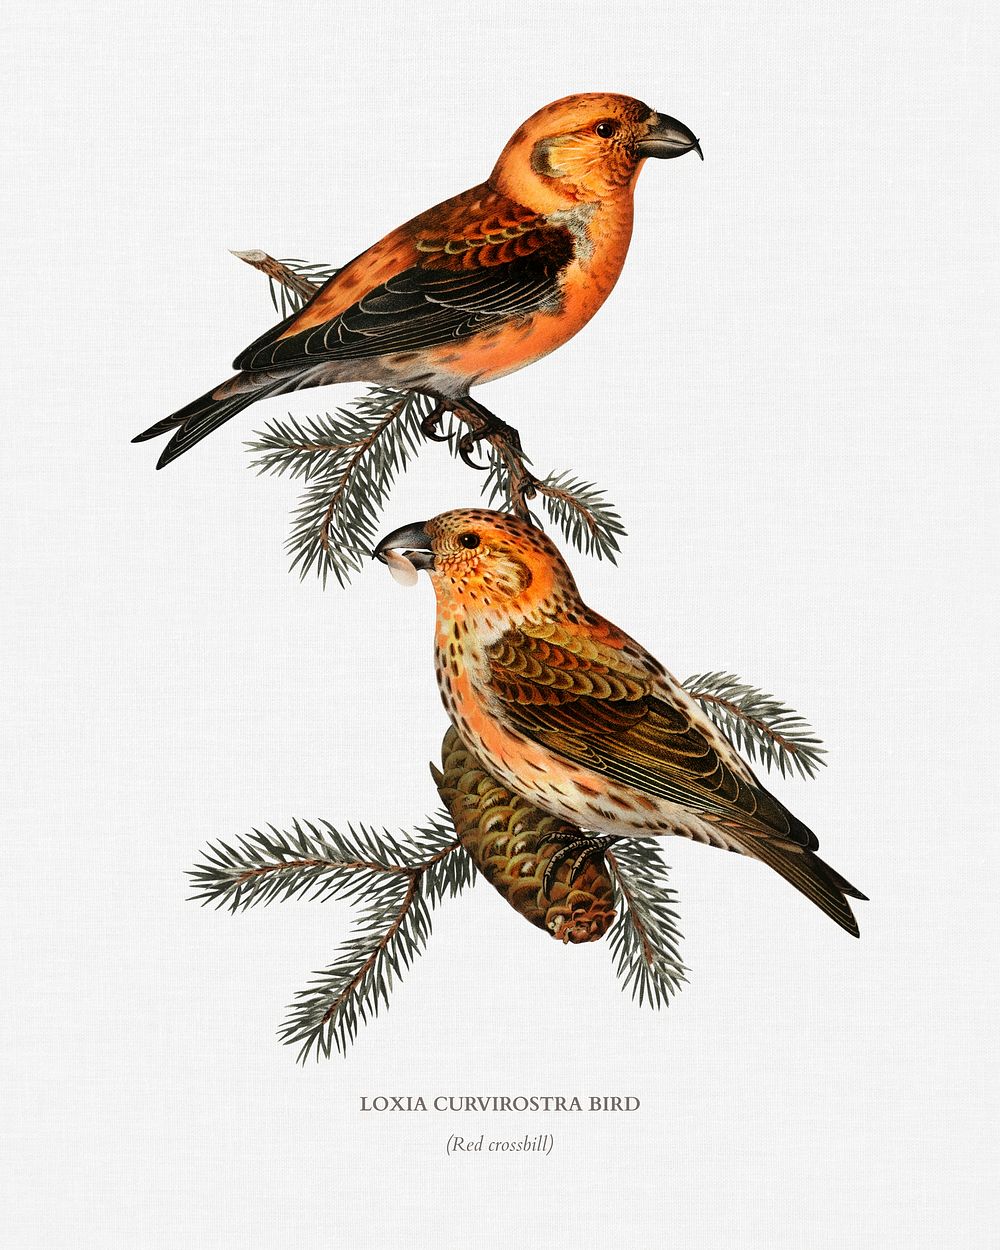 Red crossbill (Loxia curvirostra bird) illustrated by the von Wright brothers. Digitally enhanced from our own 1929 folio…